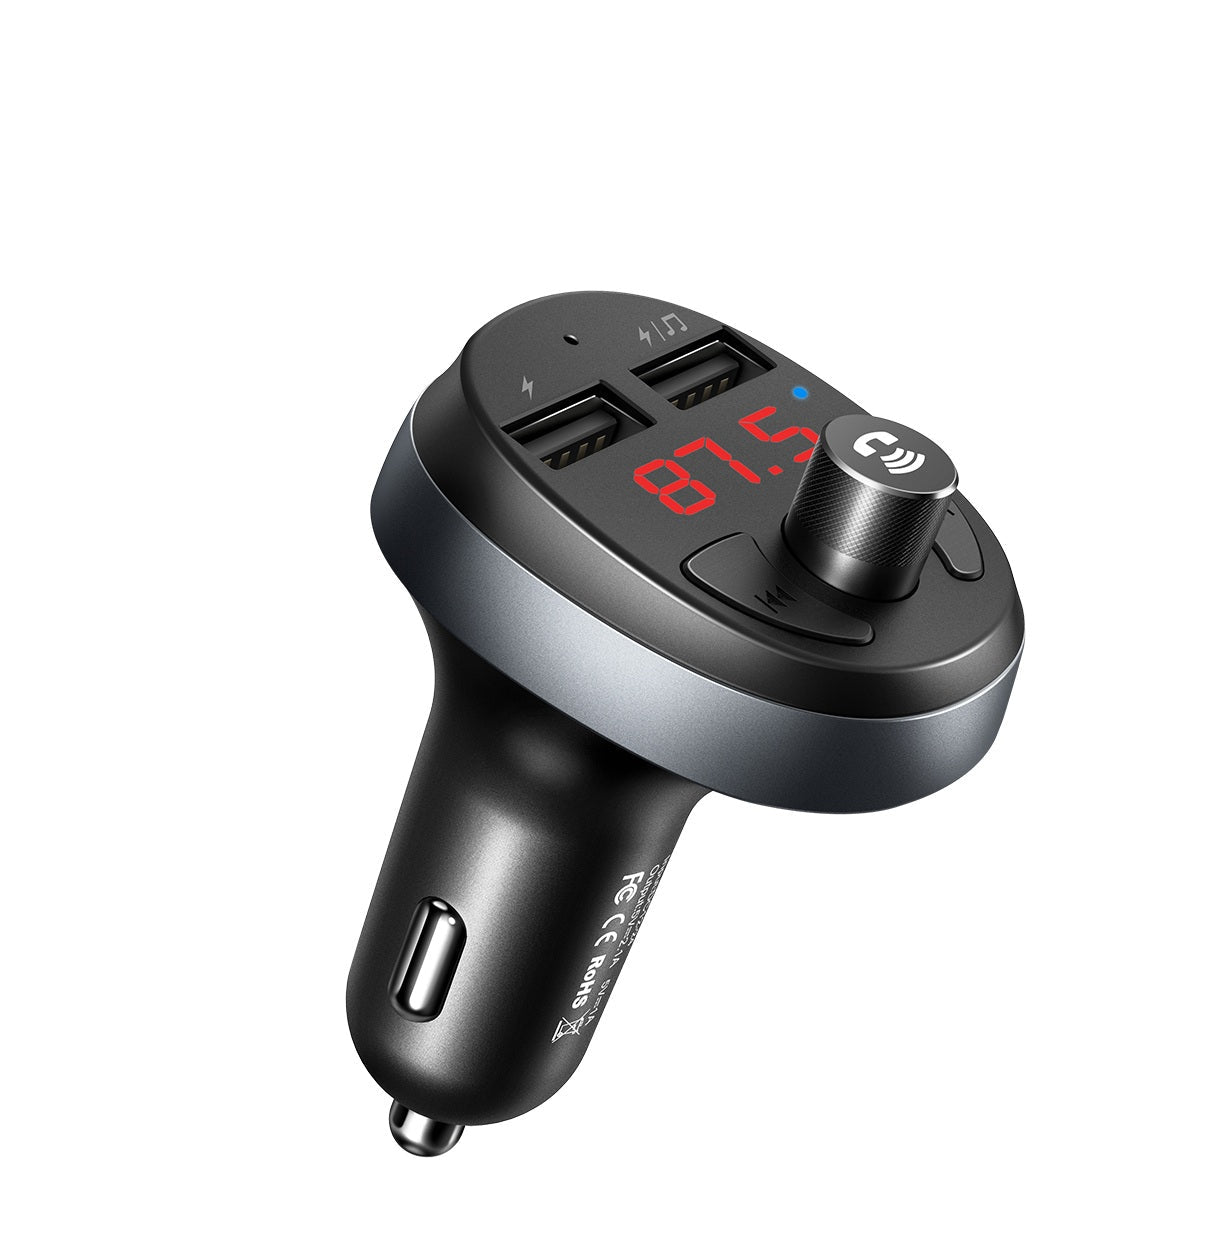 Mcdodo CC-688 | Bluetooth FM Transmitter Car Charger | Dual Ports (USB) Mobile Cable Store